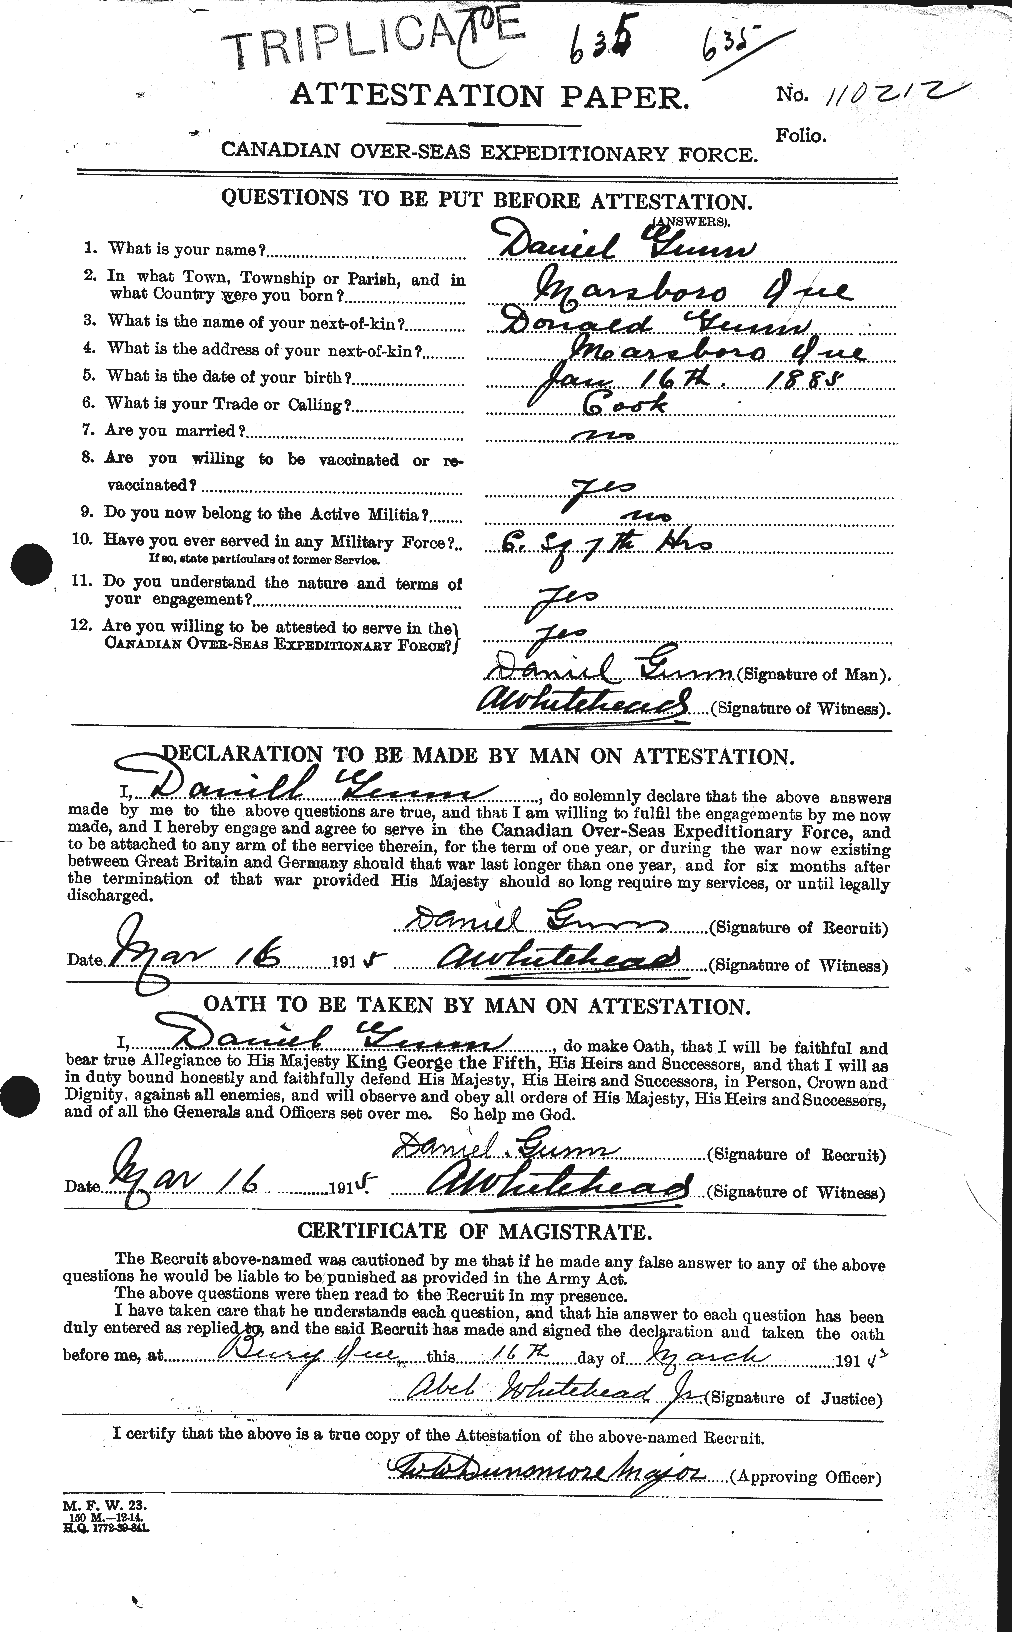 Personnel Records of the First World War - CEF 368019a